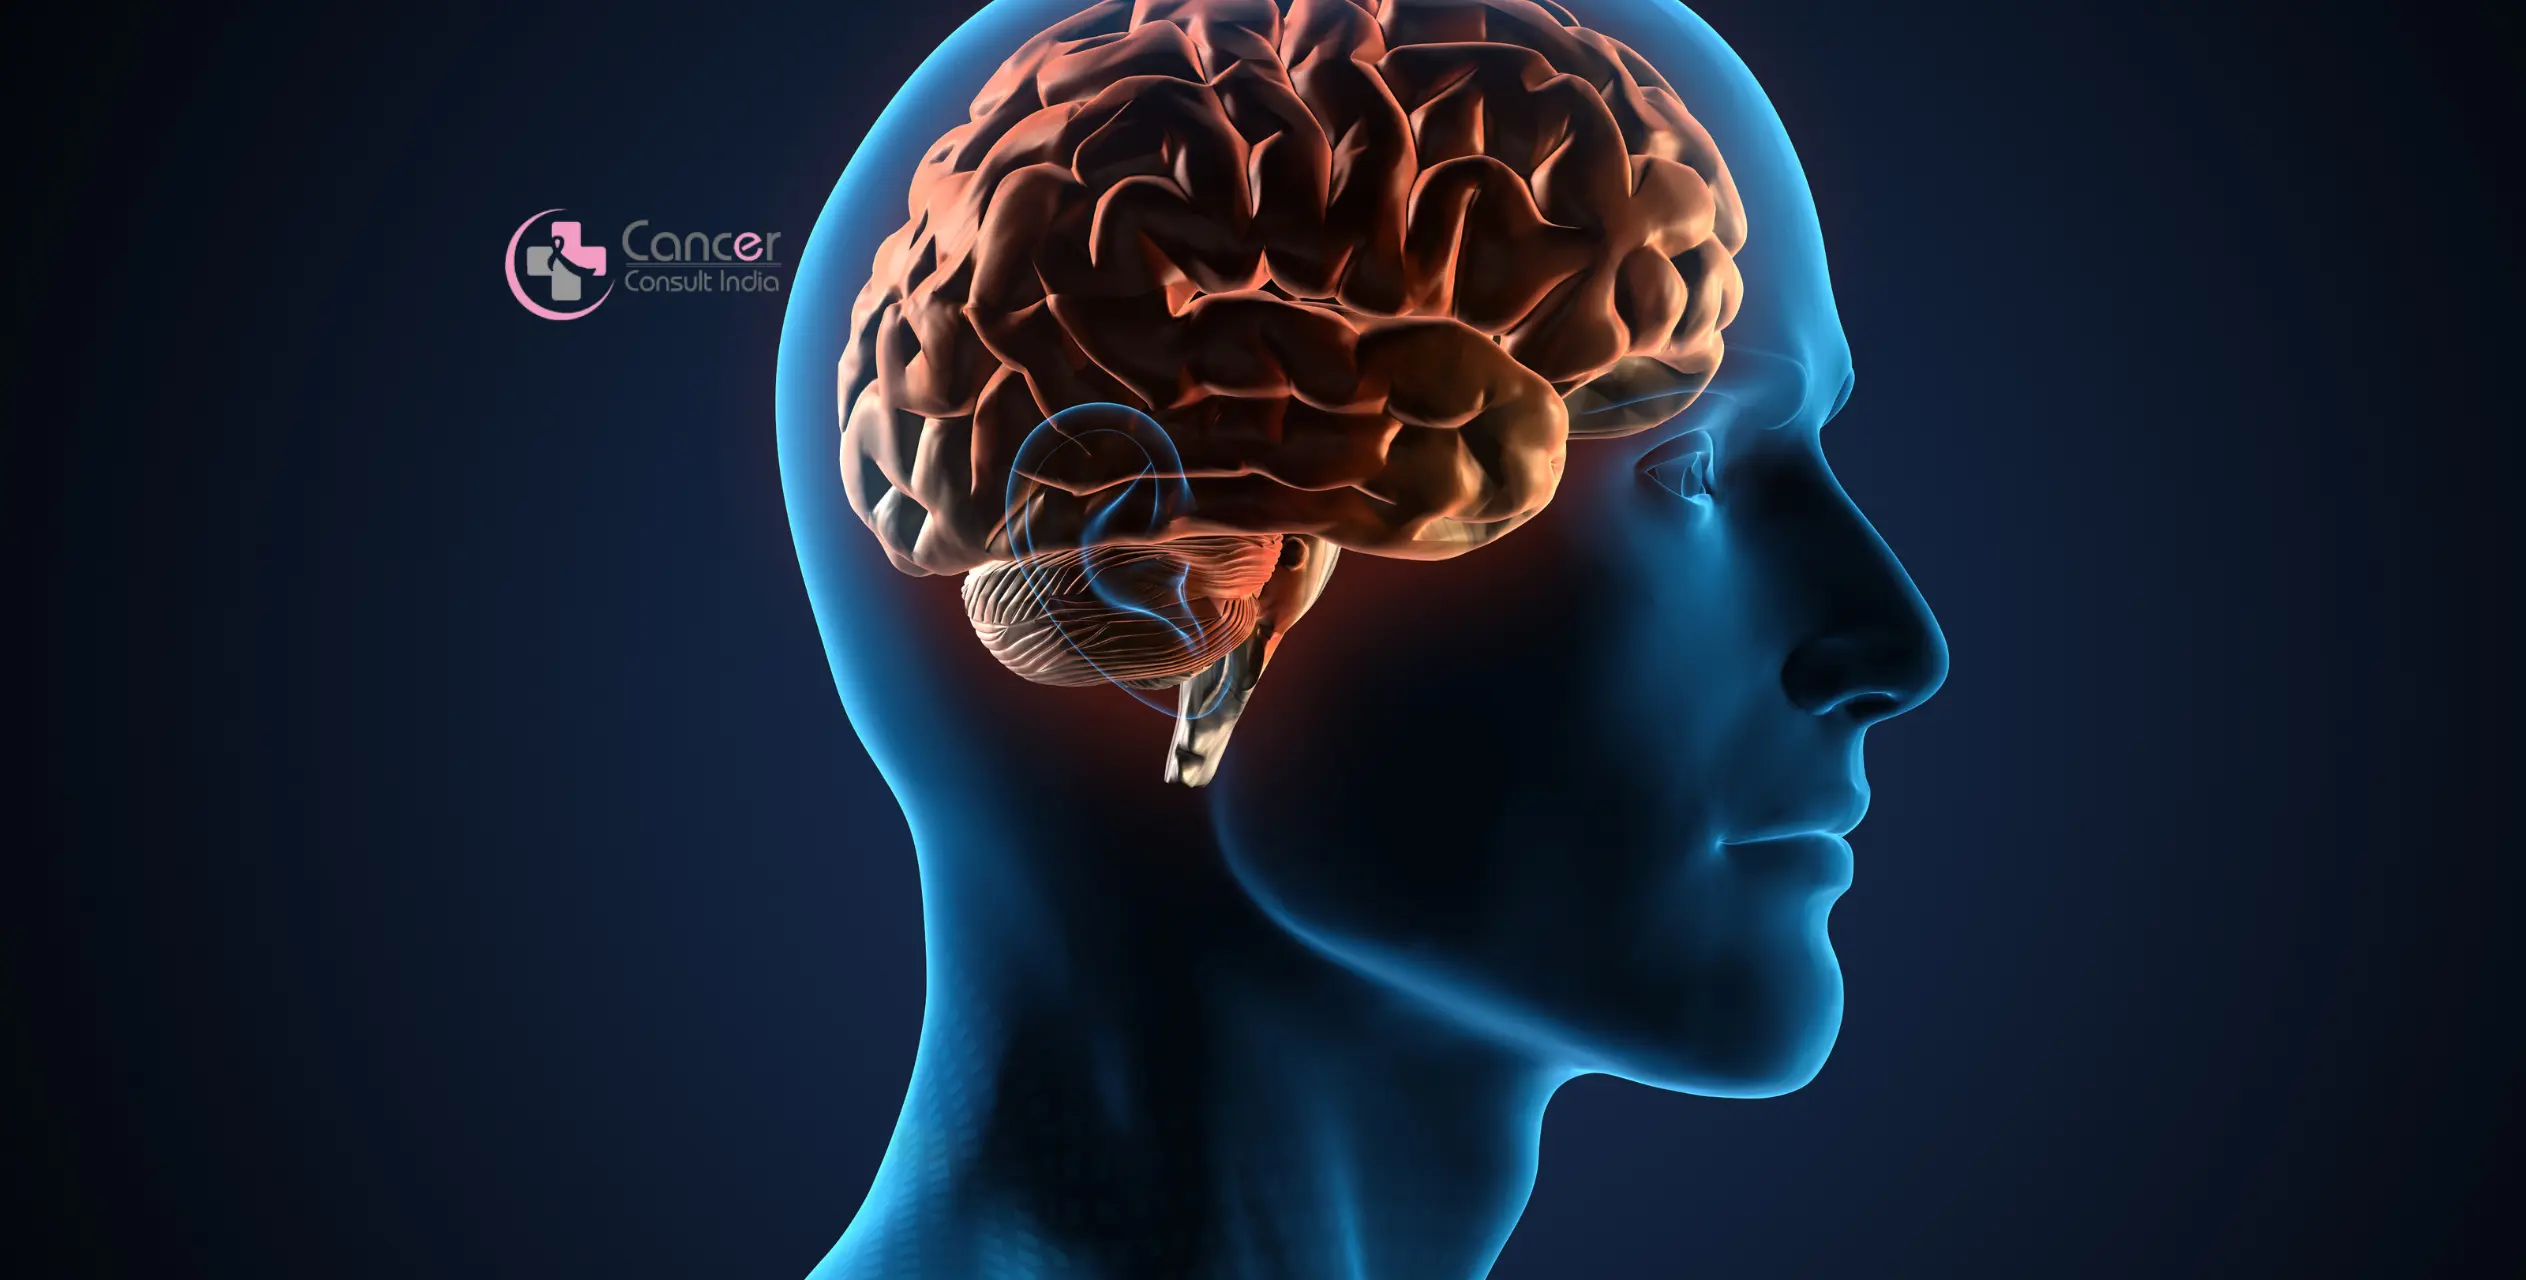 6 Warning Signs of Brain Cancer You Shouldn't Ignore